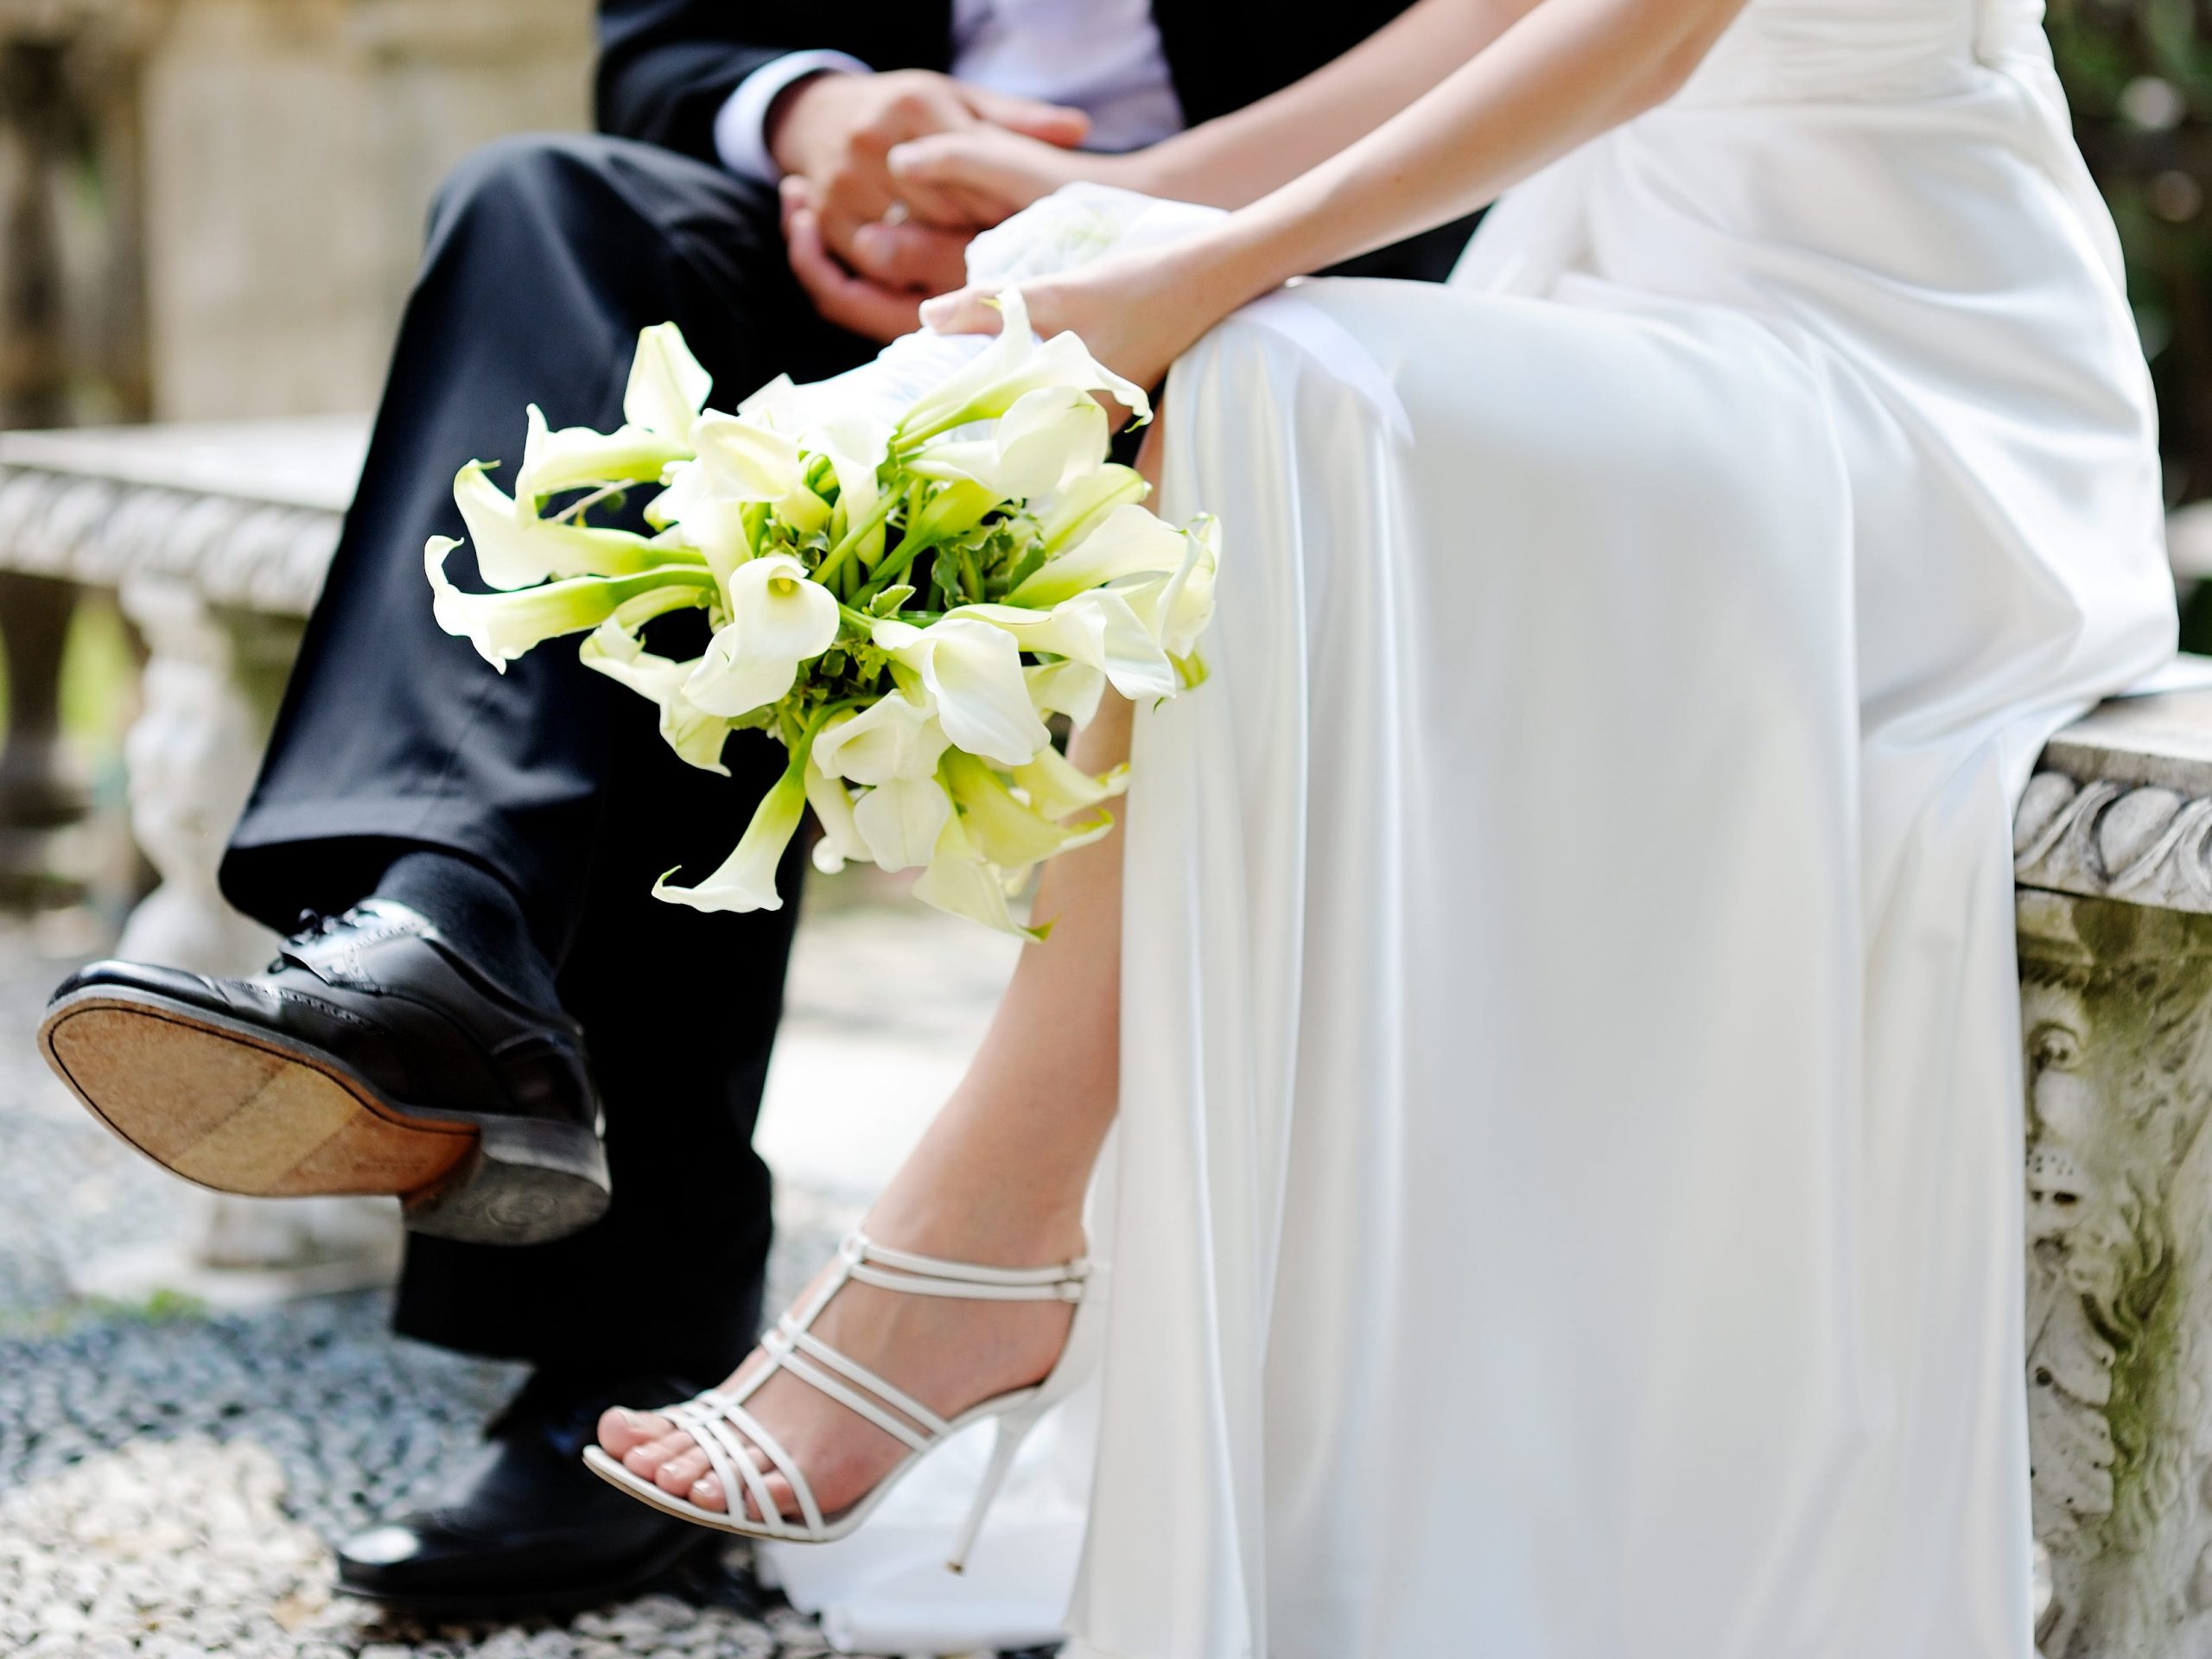 A bride and groom sitting on a bench.